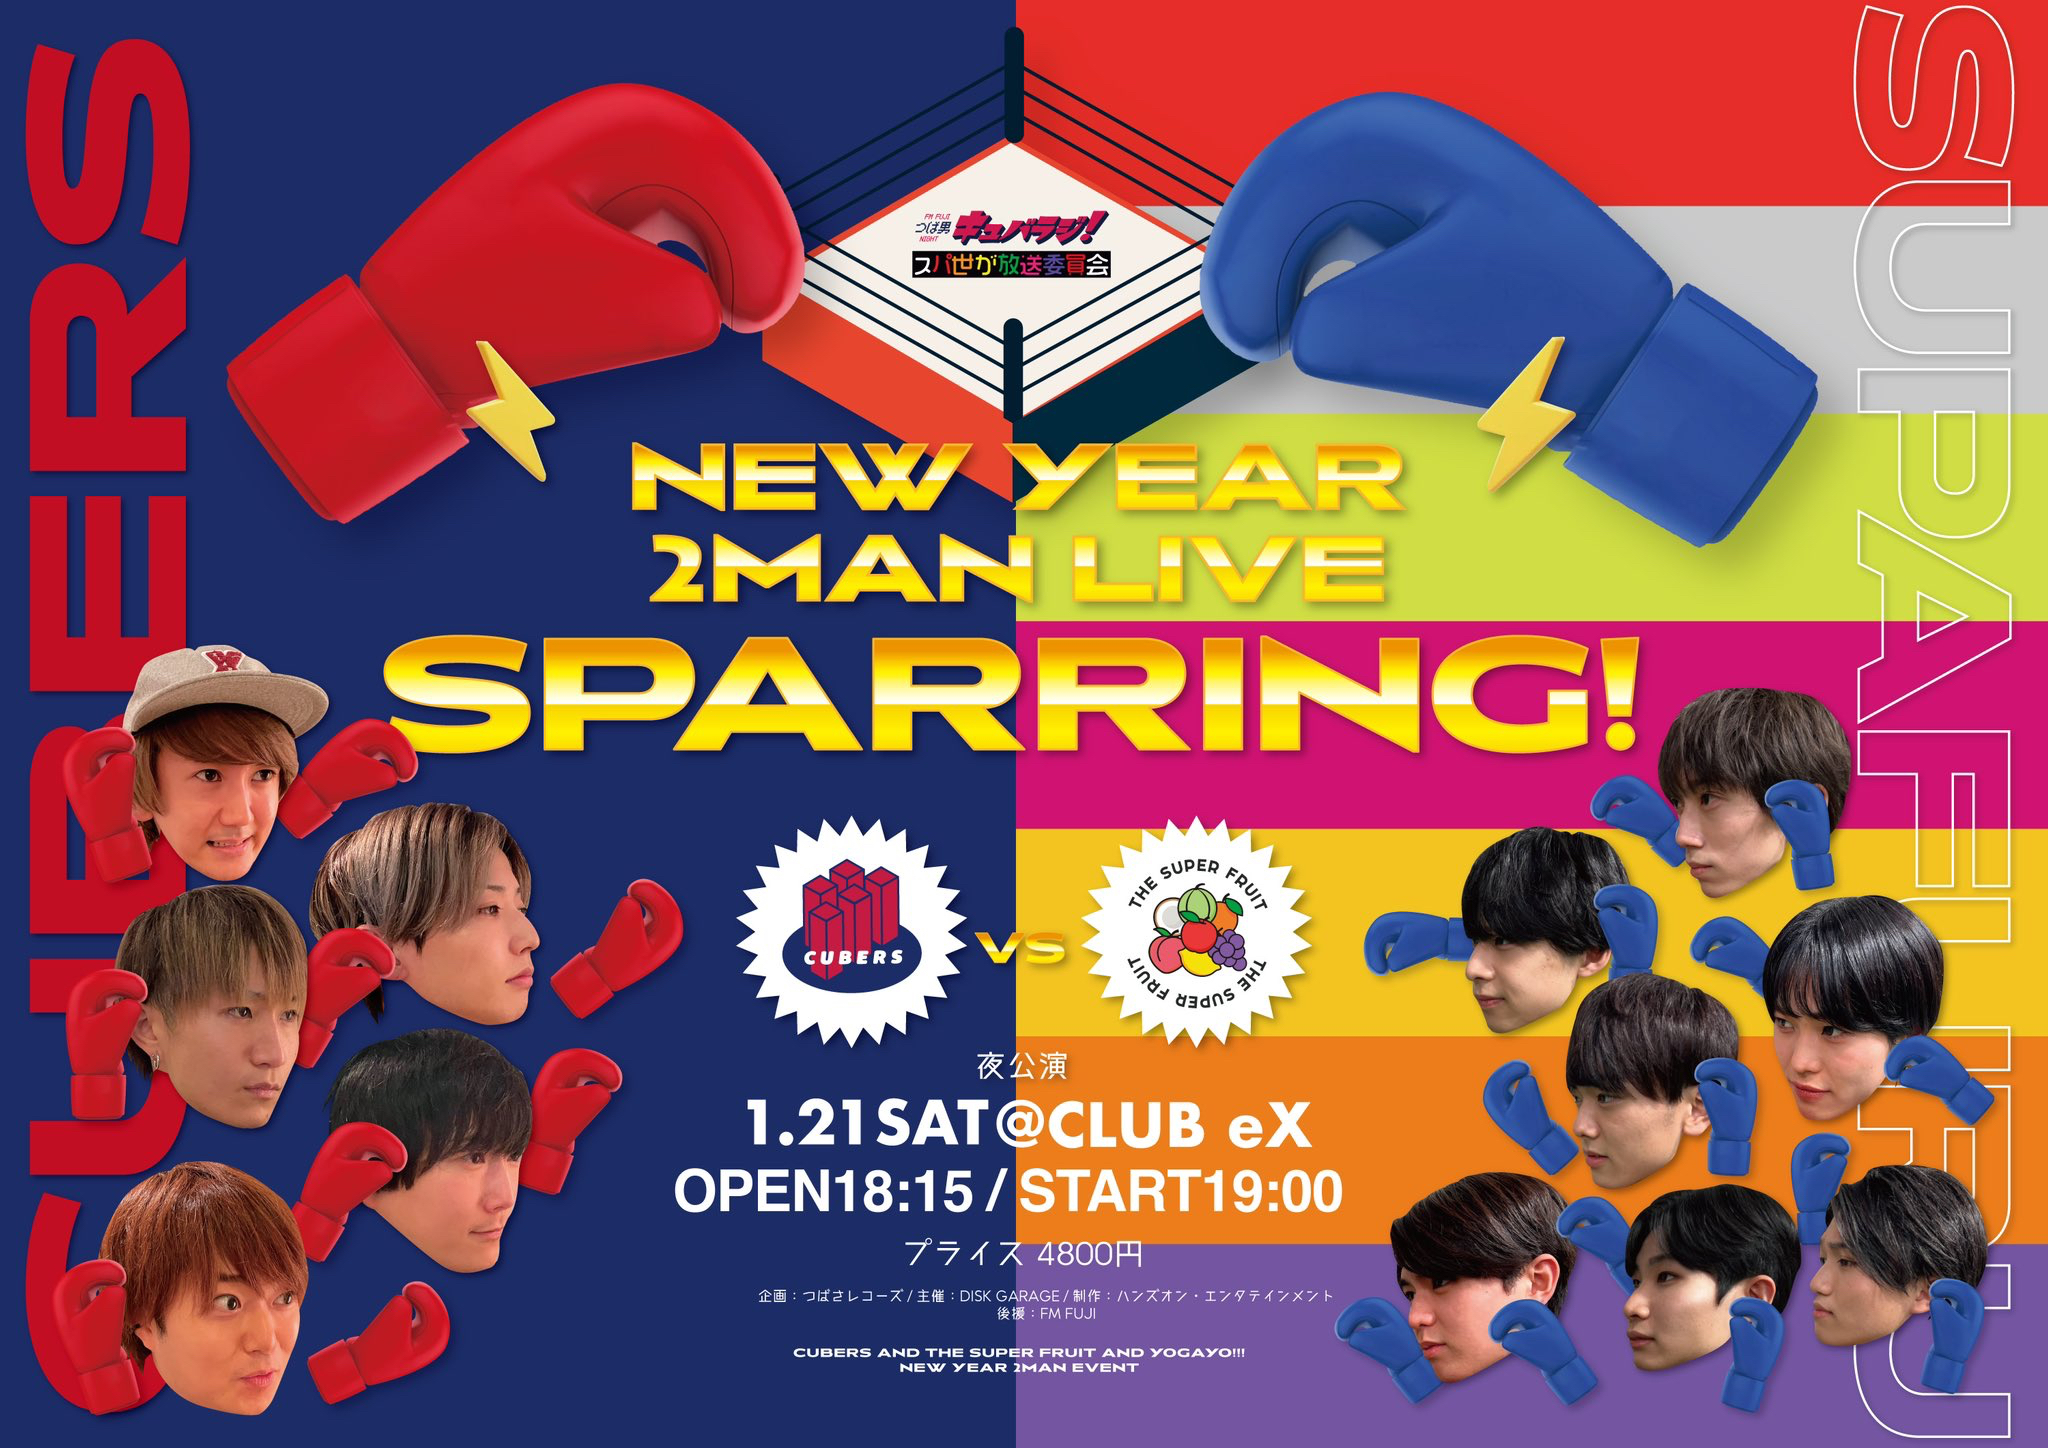 【NEWS】1月21日(土)開催”FM FUJI つば男NIGHT presents”「New Year 2Man Live Sparring  CUBERS × THE SUPER FRUIT」生配信が決定！